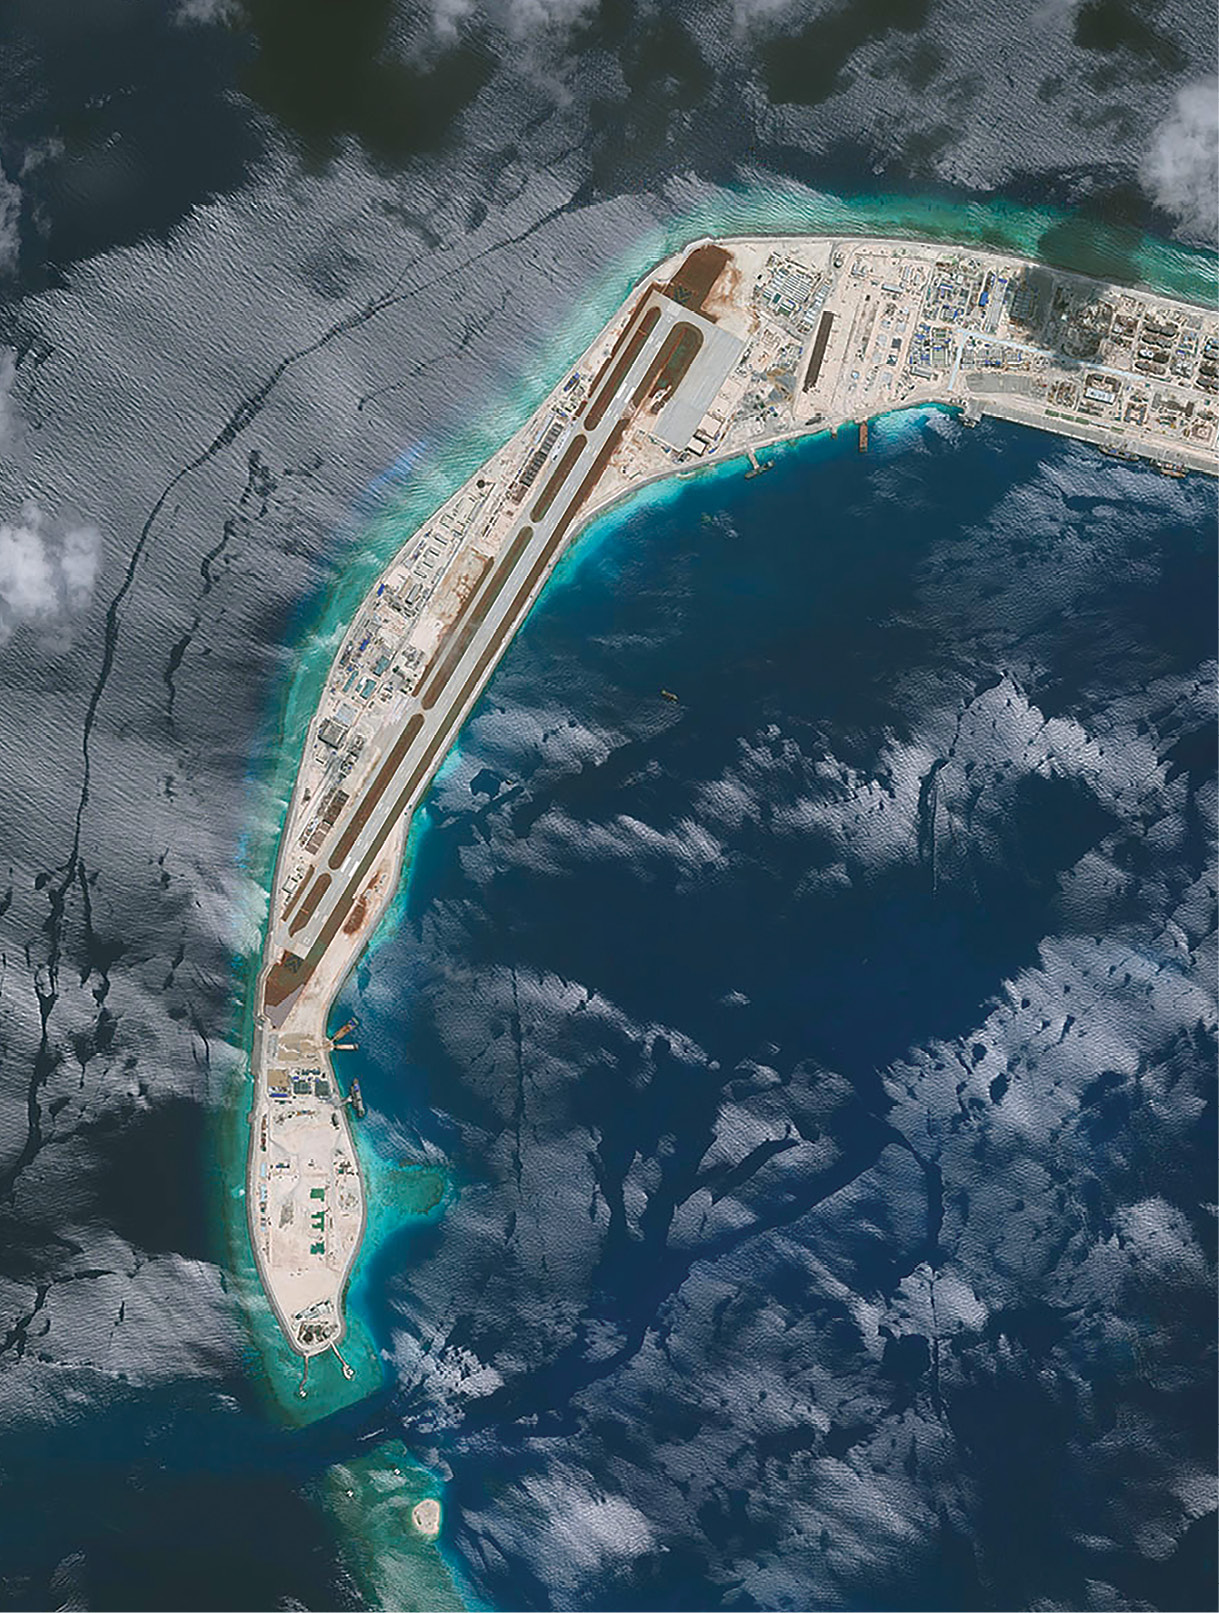 A 2.6-kilometer runway is clearly identifiable in this 22 July 2016 satellite photo of the western arm of Mischief Reef, located east of the contested Spratly Islands in the South China Sea. The reef is one of several that have been occupied by Chinese forces in recent years as part of that country’s land reclamation efforts, undertaken to gain and control access to the South China Sea. (Photo courtesy of the Center for Strategic and International Studies/Asia Maritime Transparency Intitiative/DigitalGlobe)